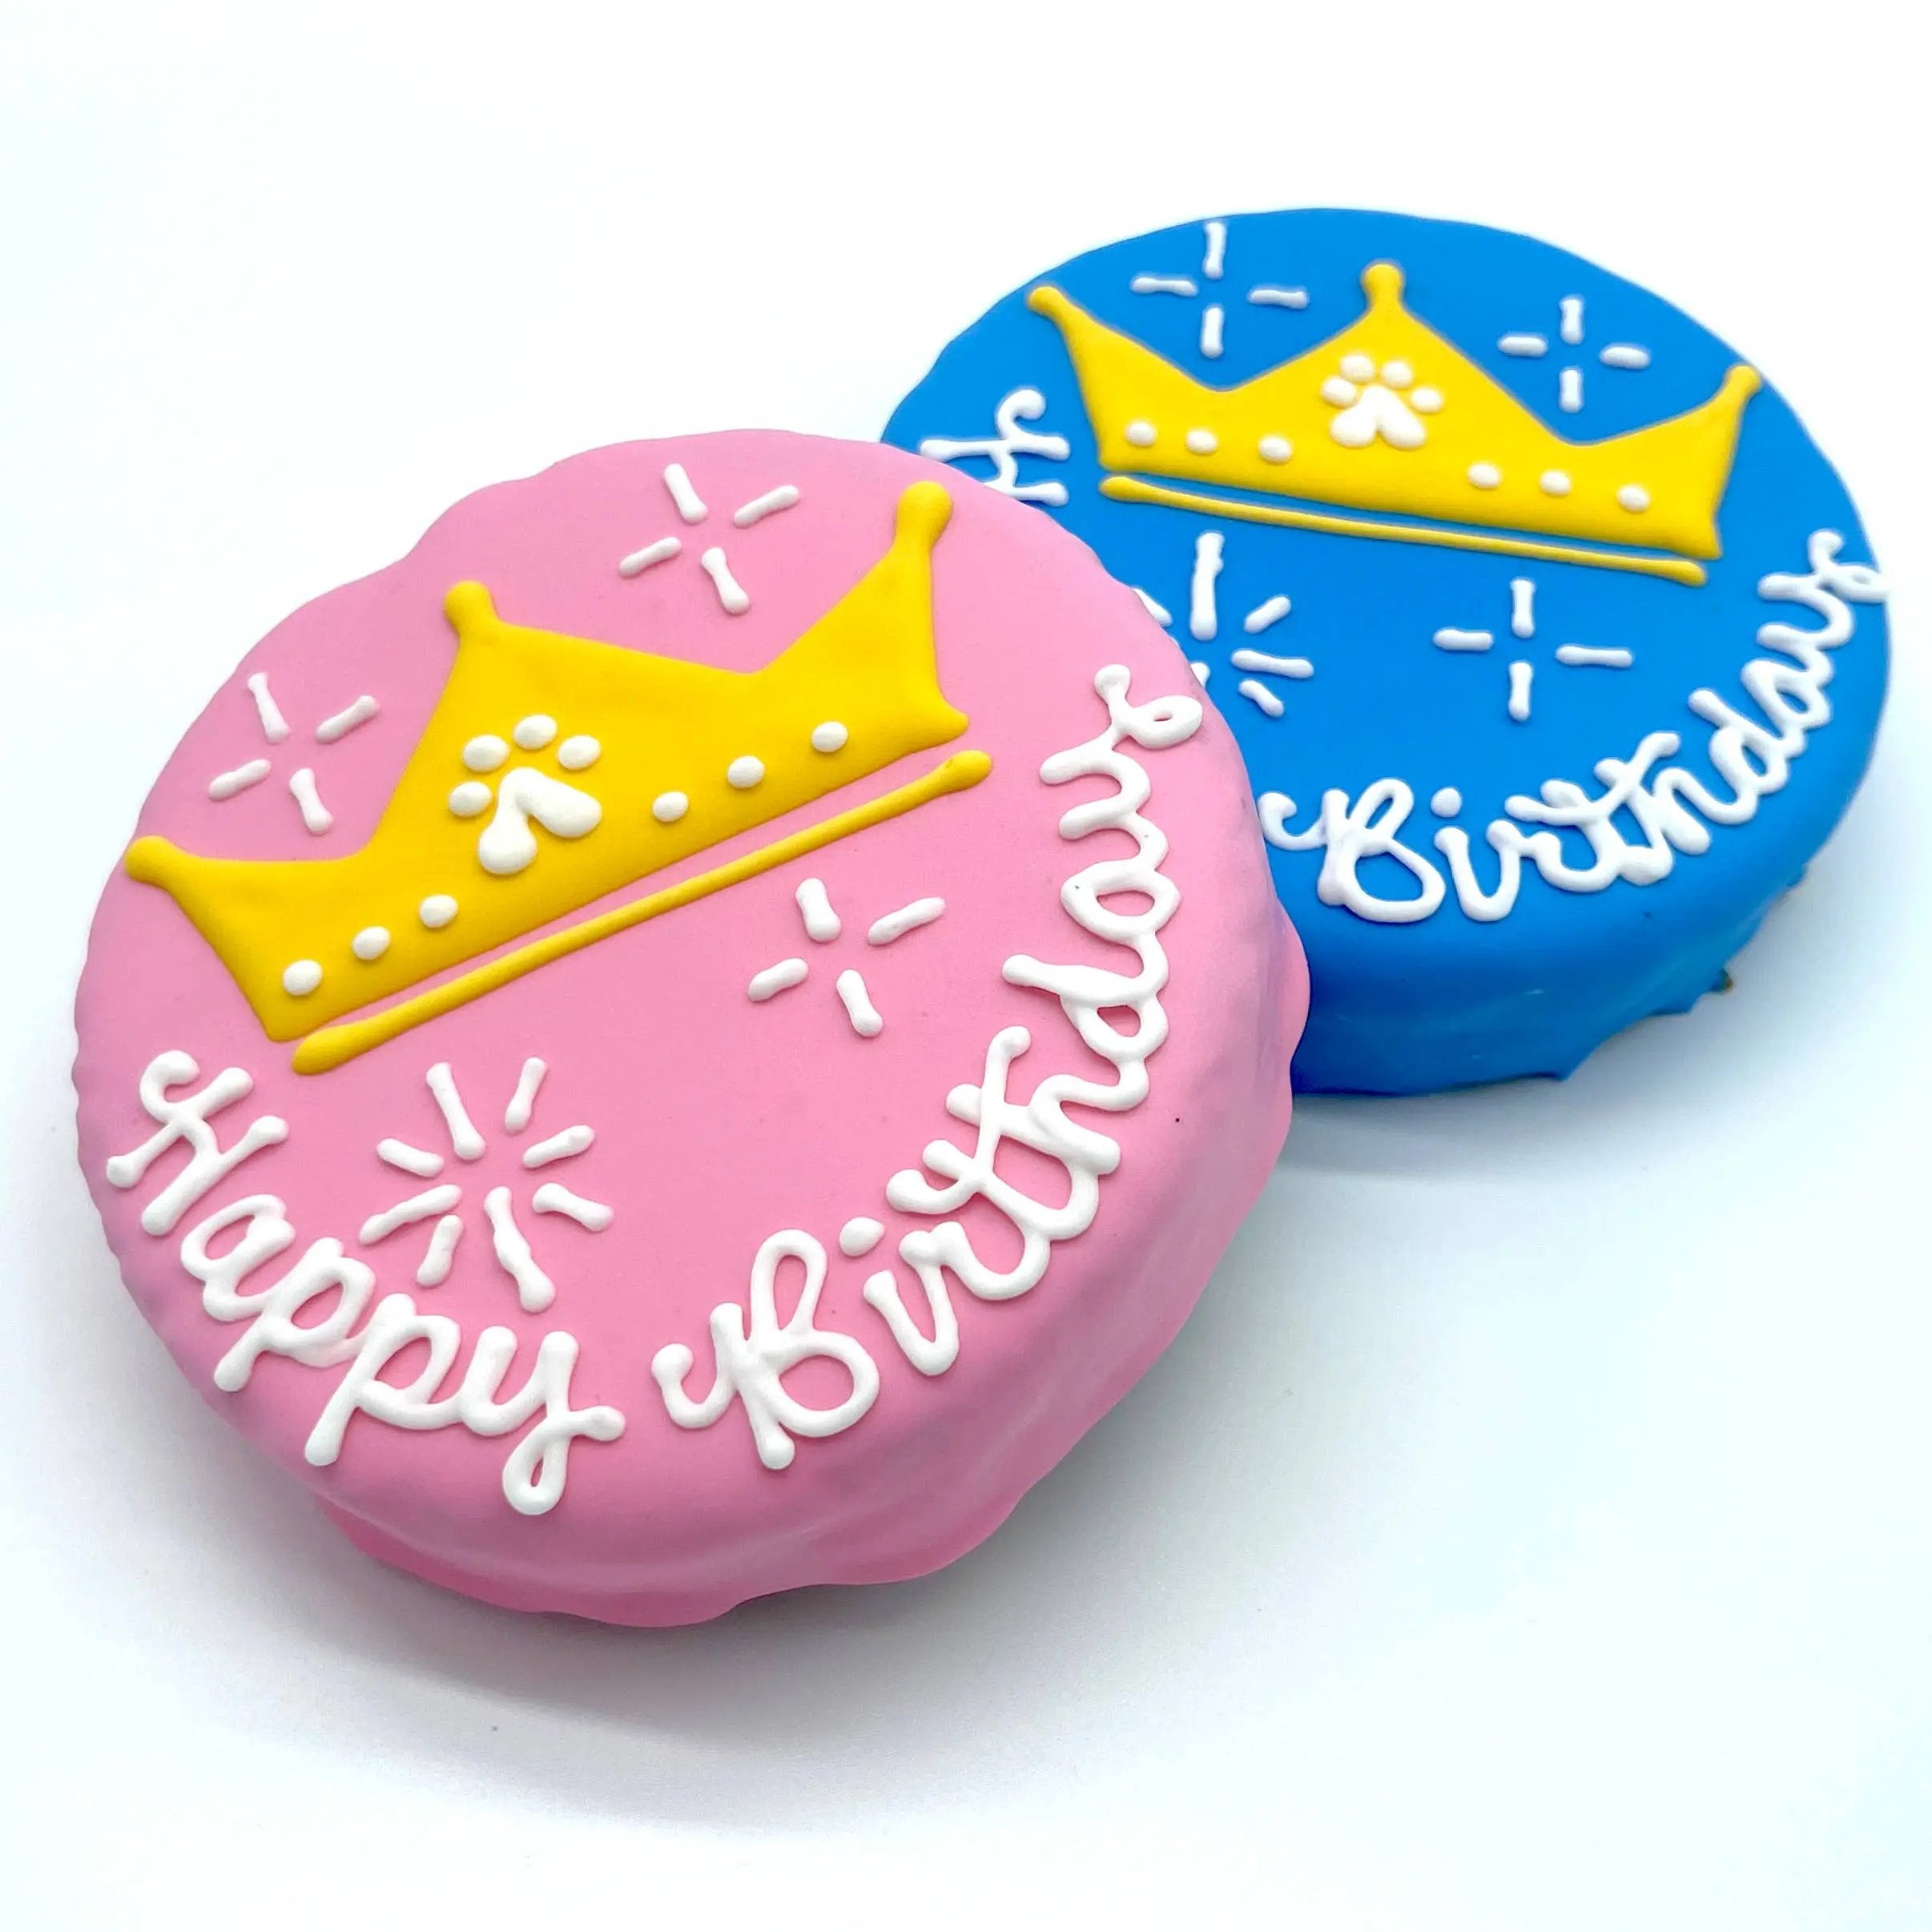 Furry Belly Bake Shop - Sparkling Crown Birthday Chewy Oat Cake